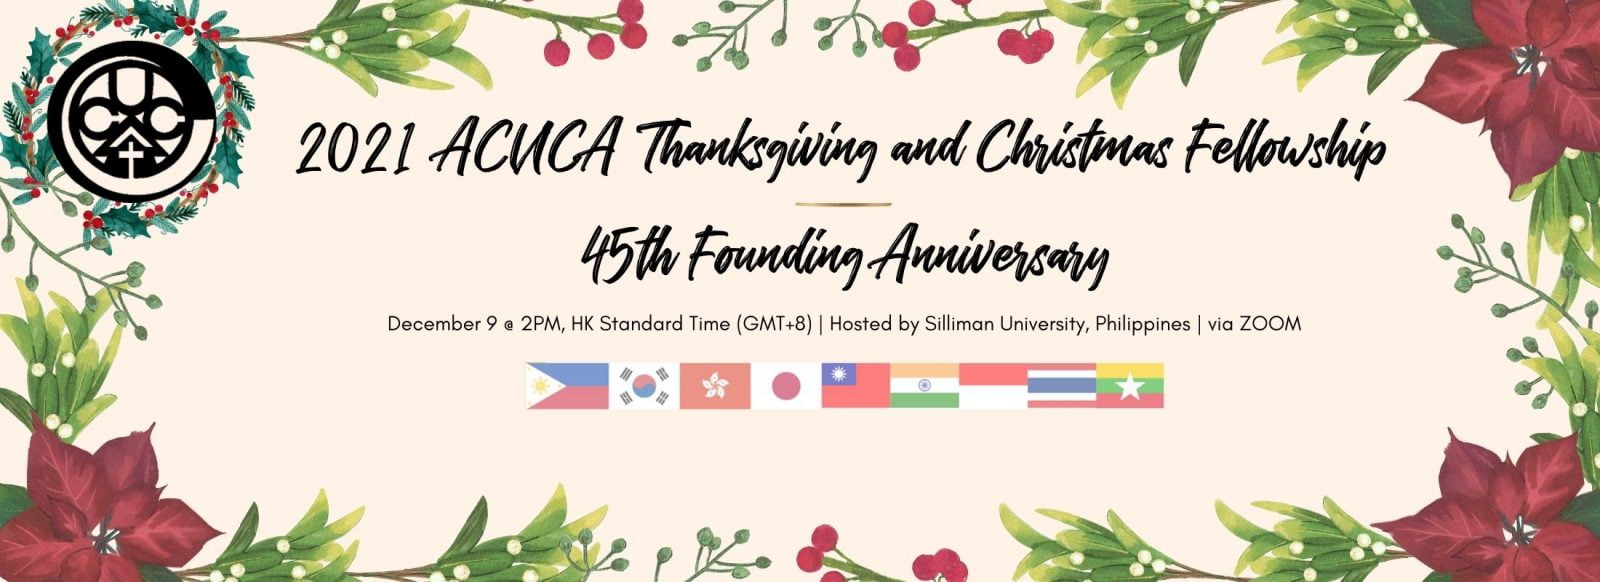 2021 ACUCA Thanksgiving and Christmas Fellowship / 45th Founding Anniversary